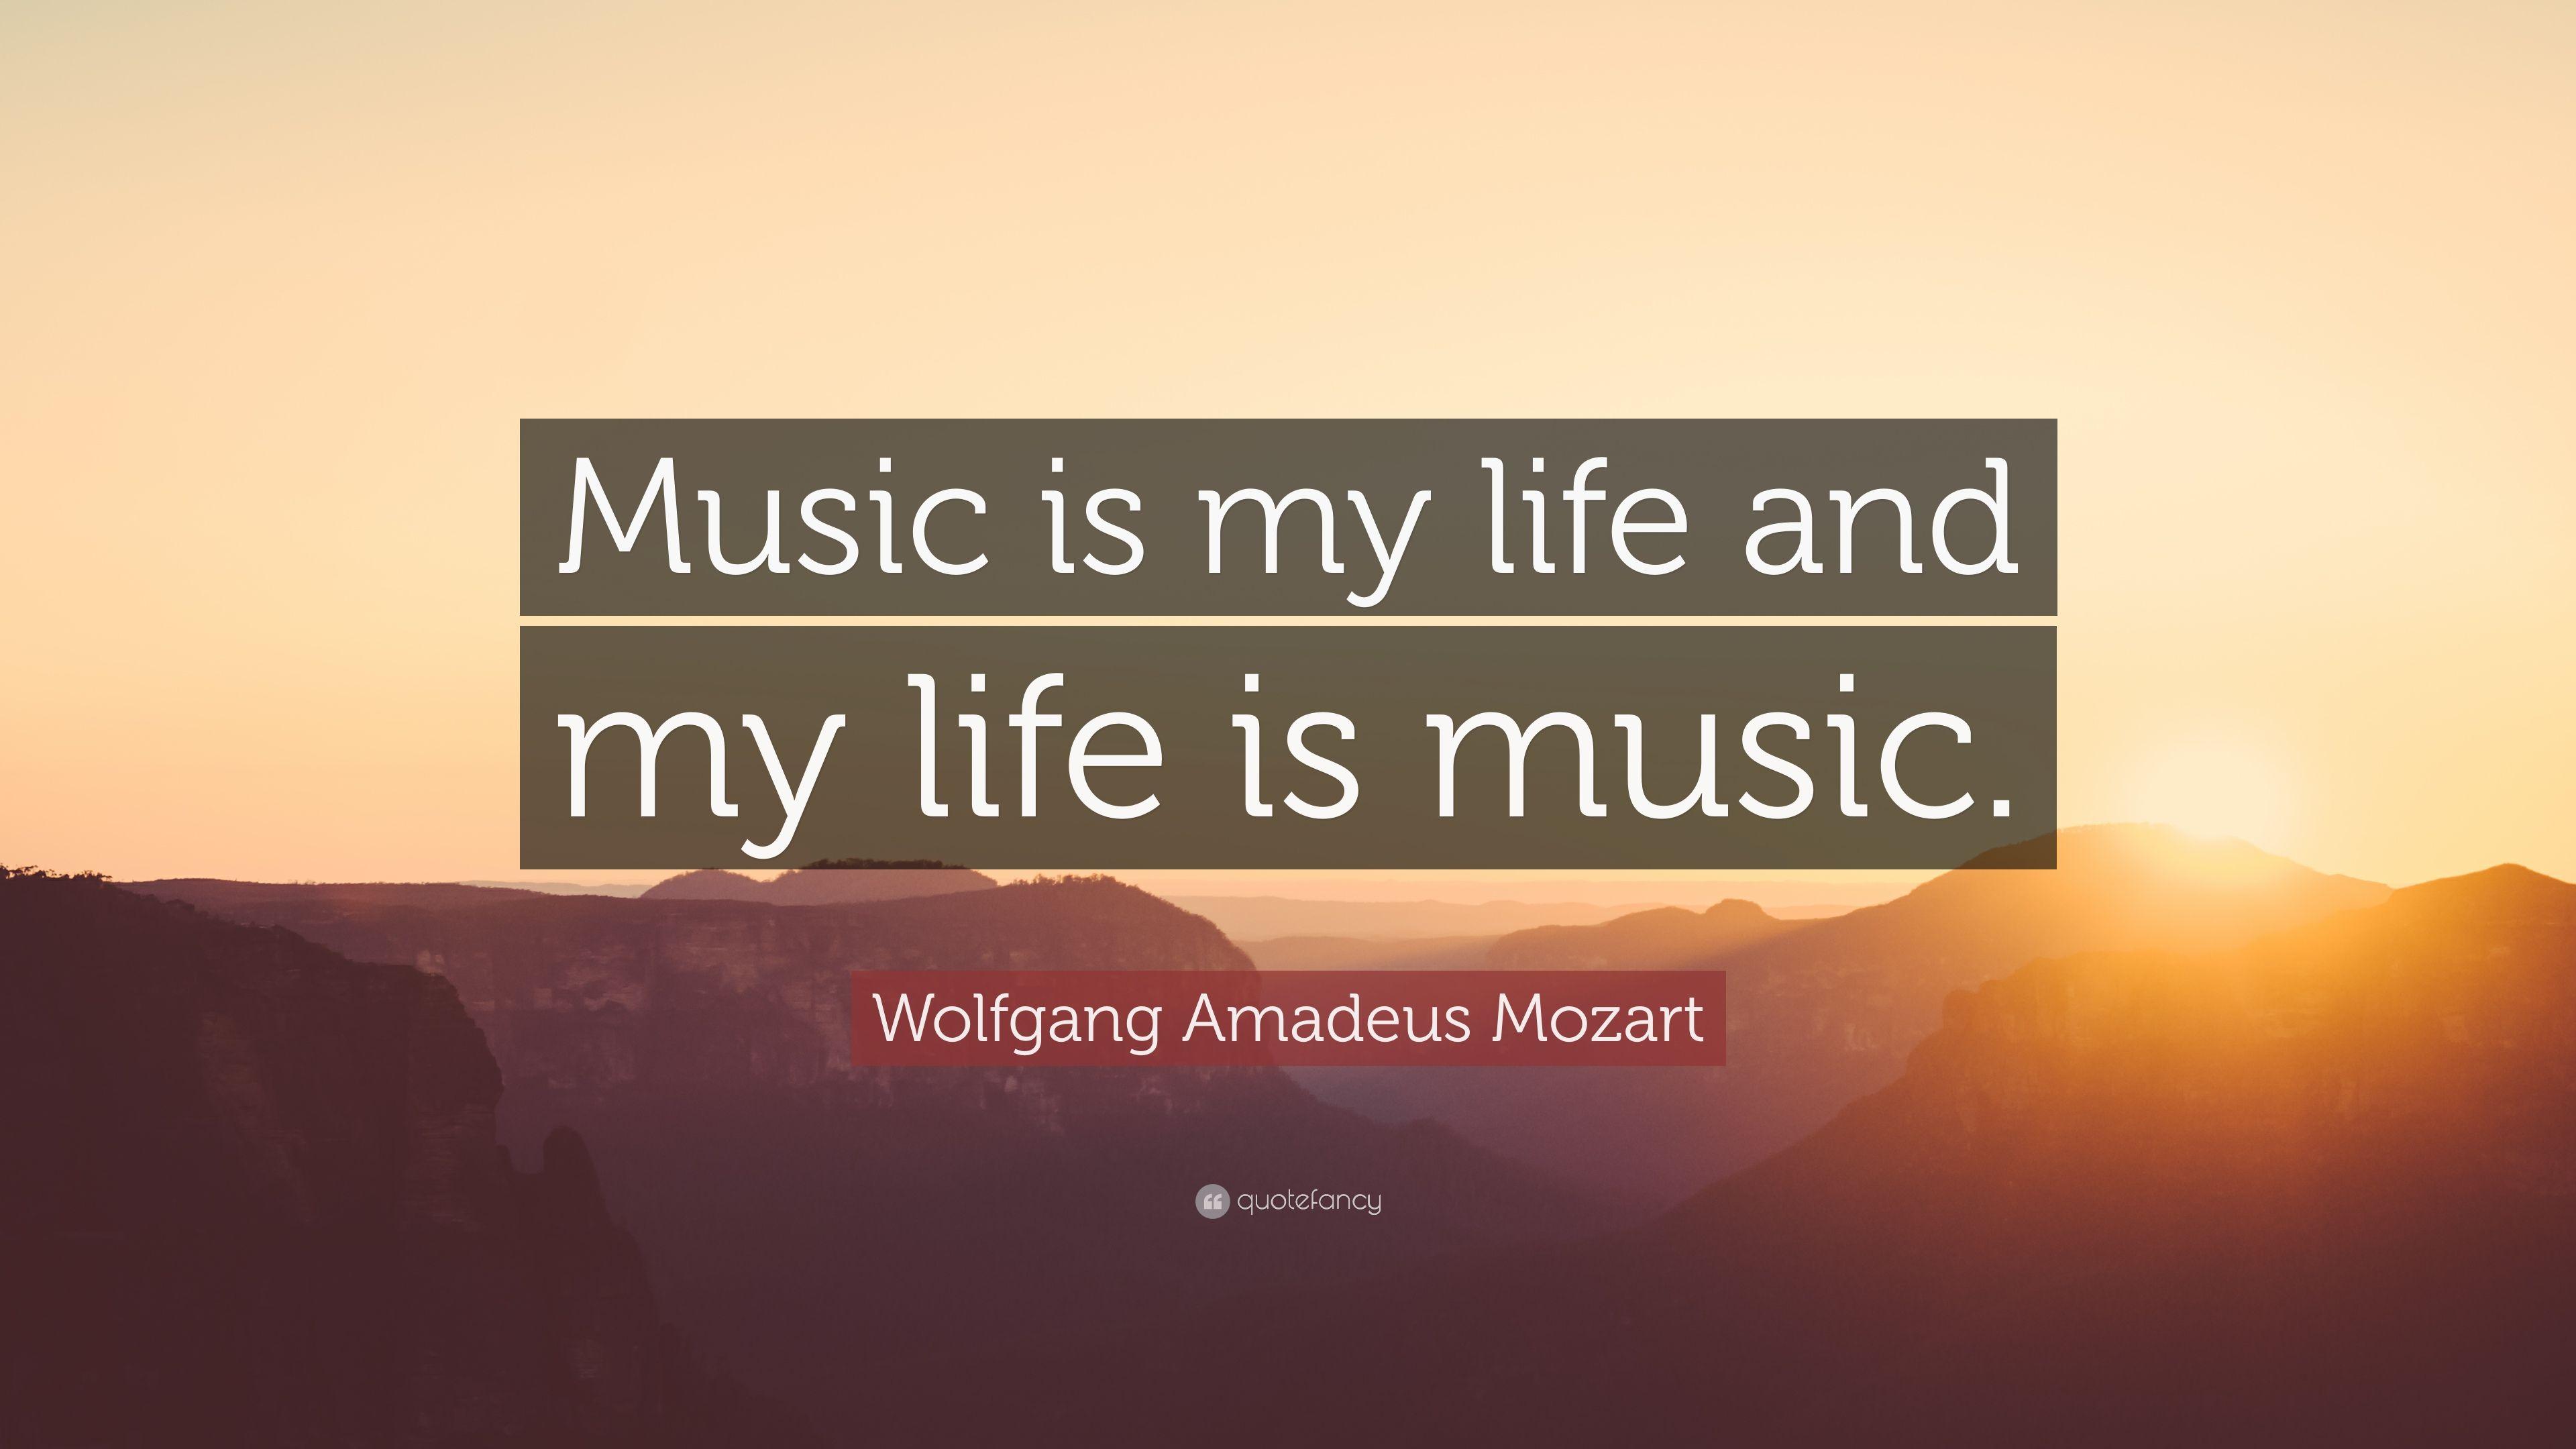 Wolfgang Amadeus Mozart Quote: “Music is my life and my life is